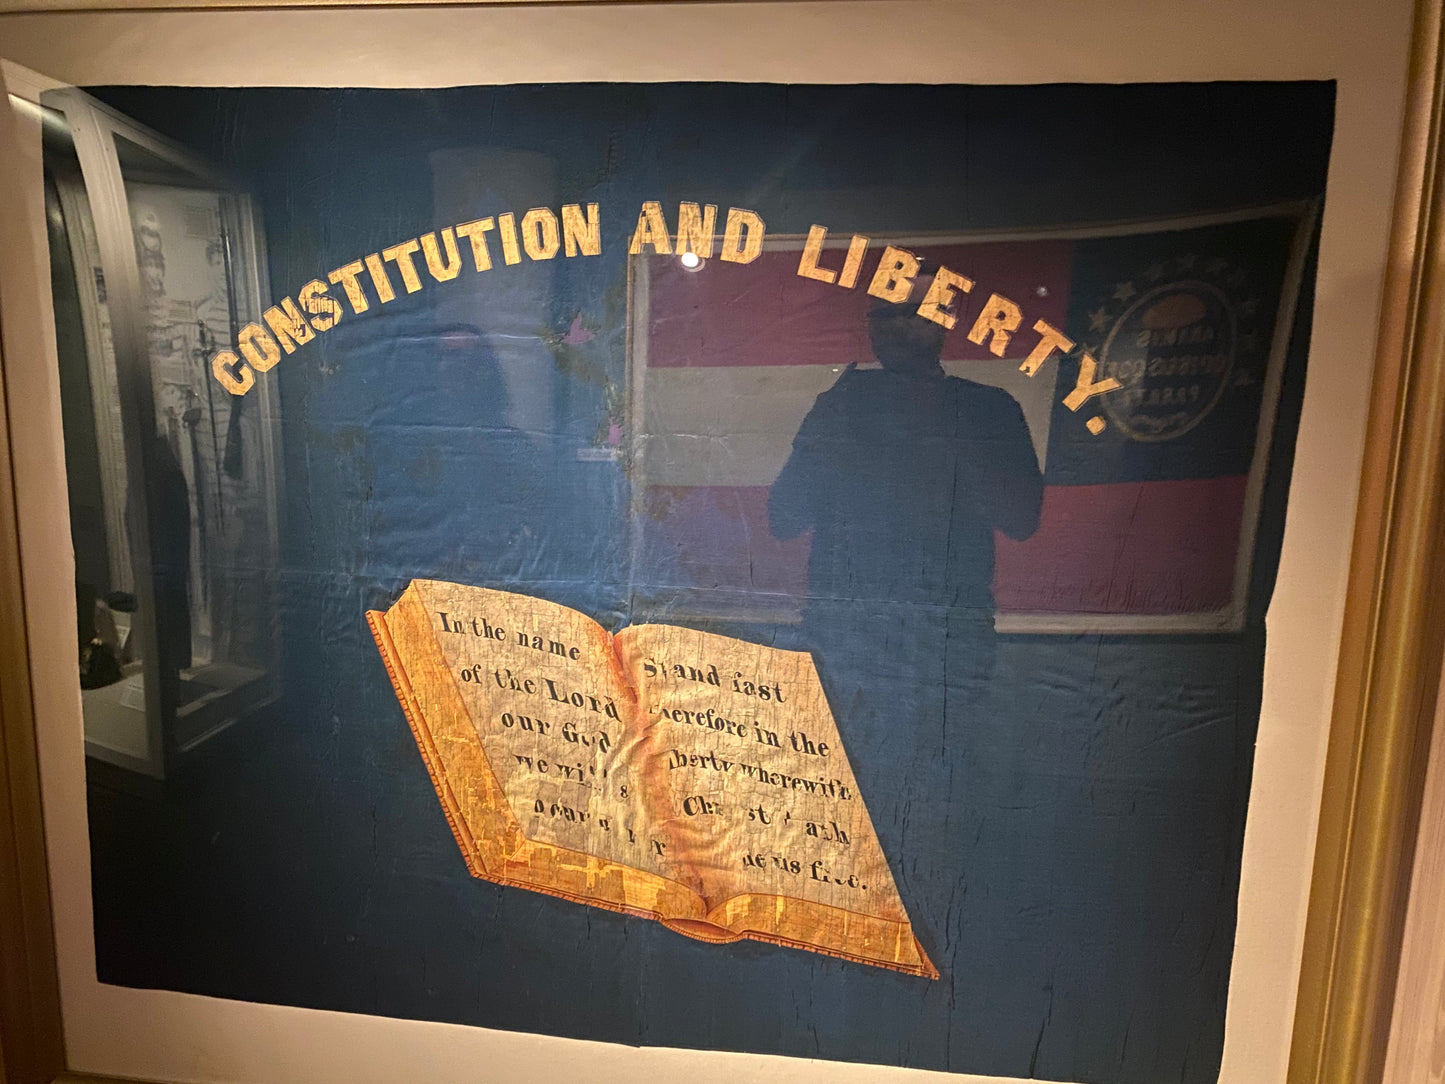 "Constitution and Liberty" South Carolina Flag Stickers